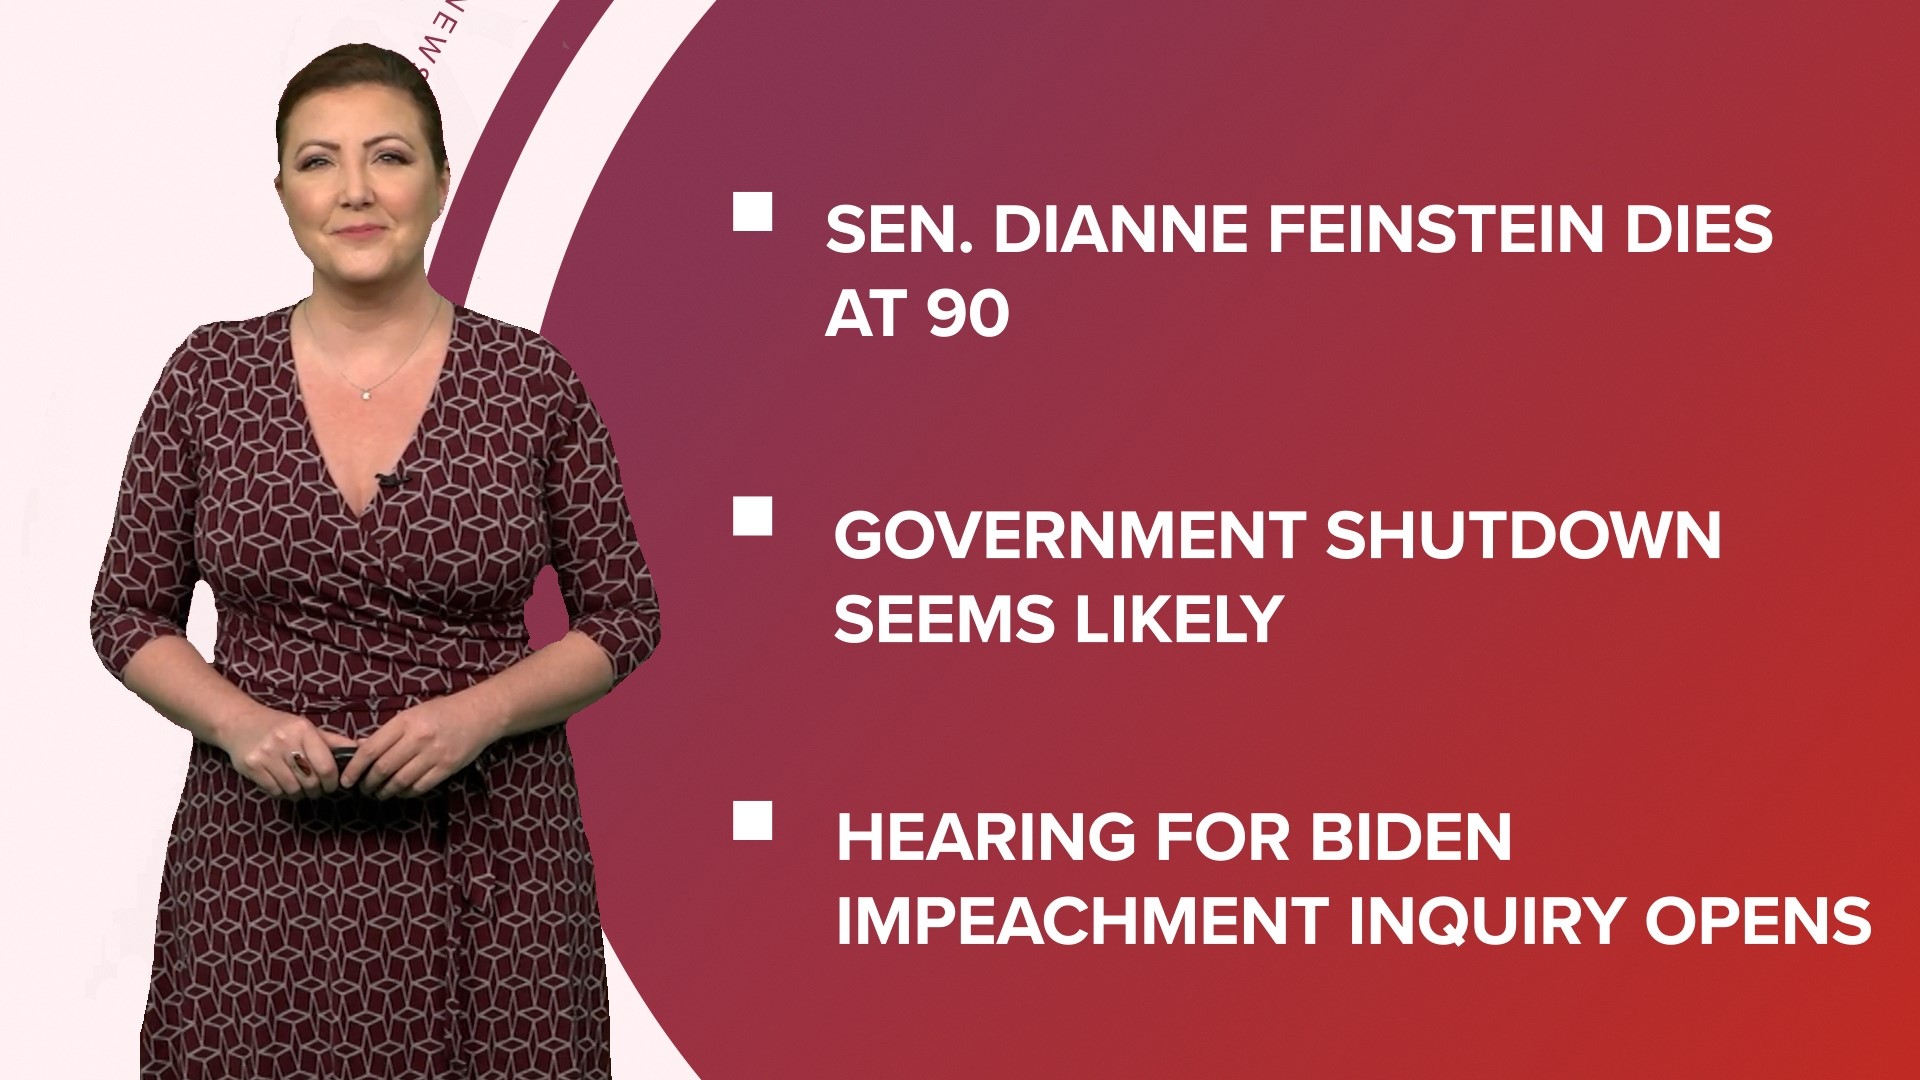 A look at what is happening in the news from a possible government shutdown and its impacts to impeachment inquiries into President Biden and a new *NSYNC song.